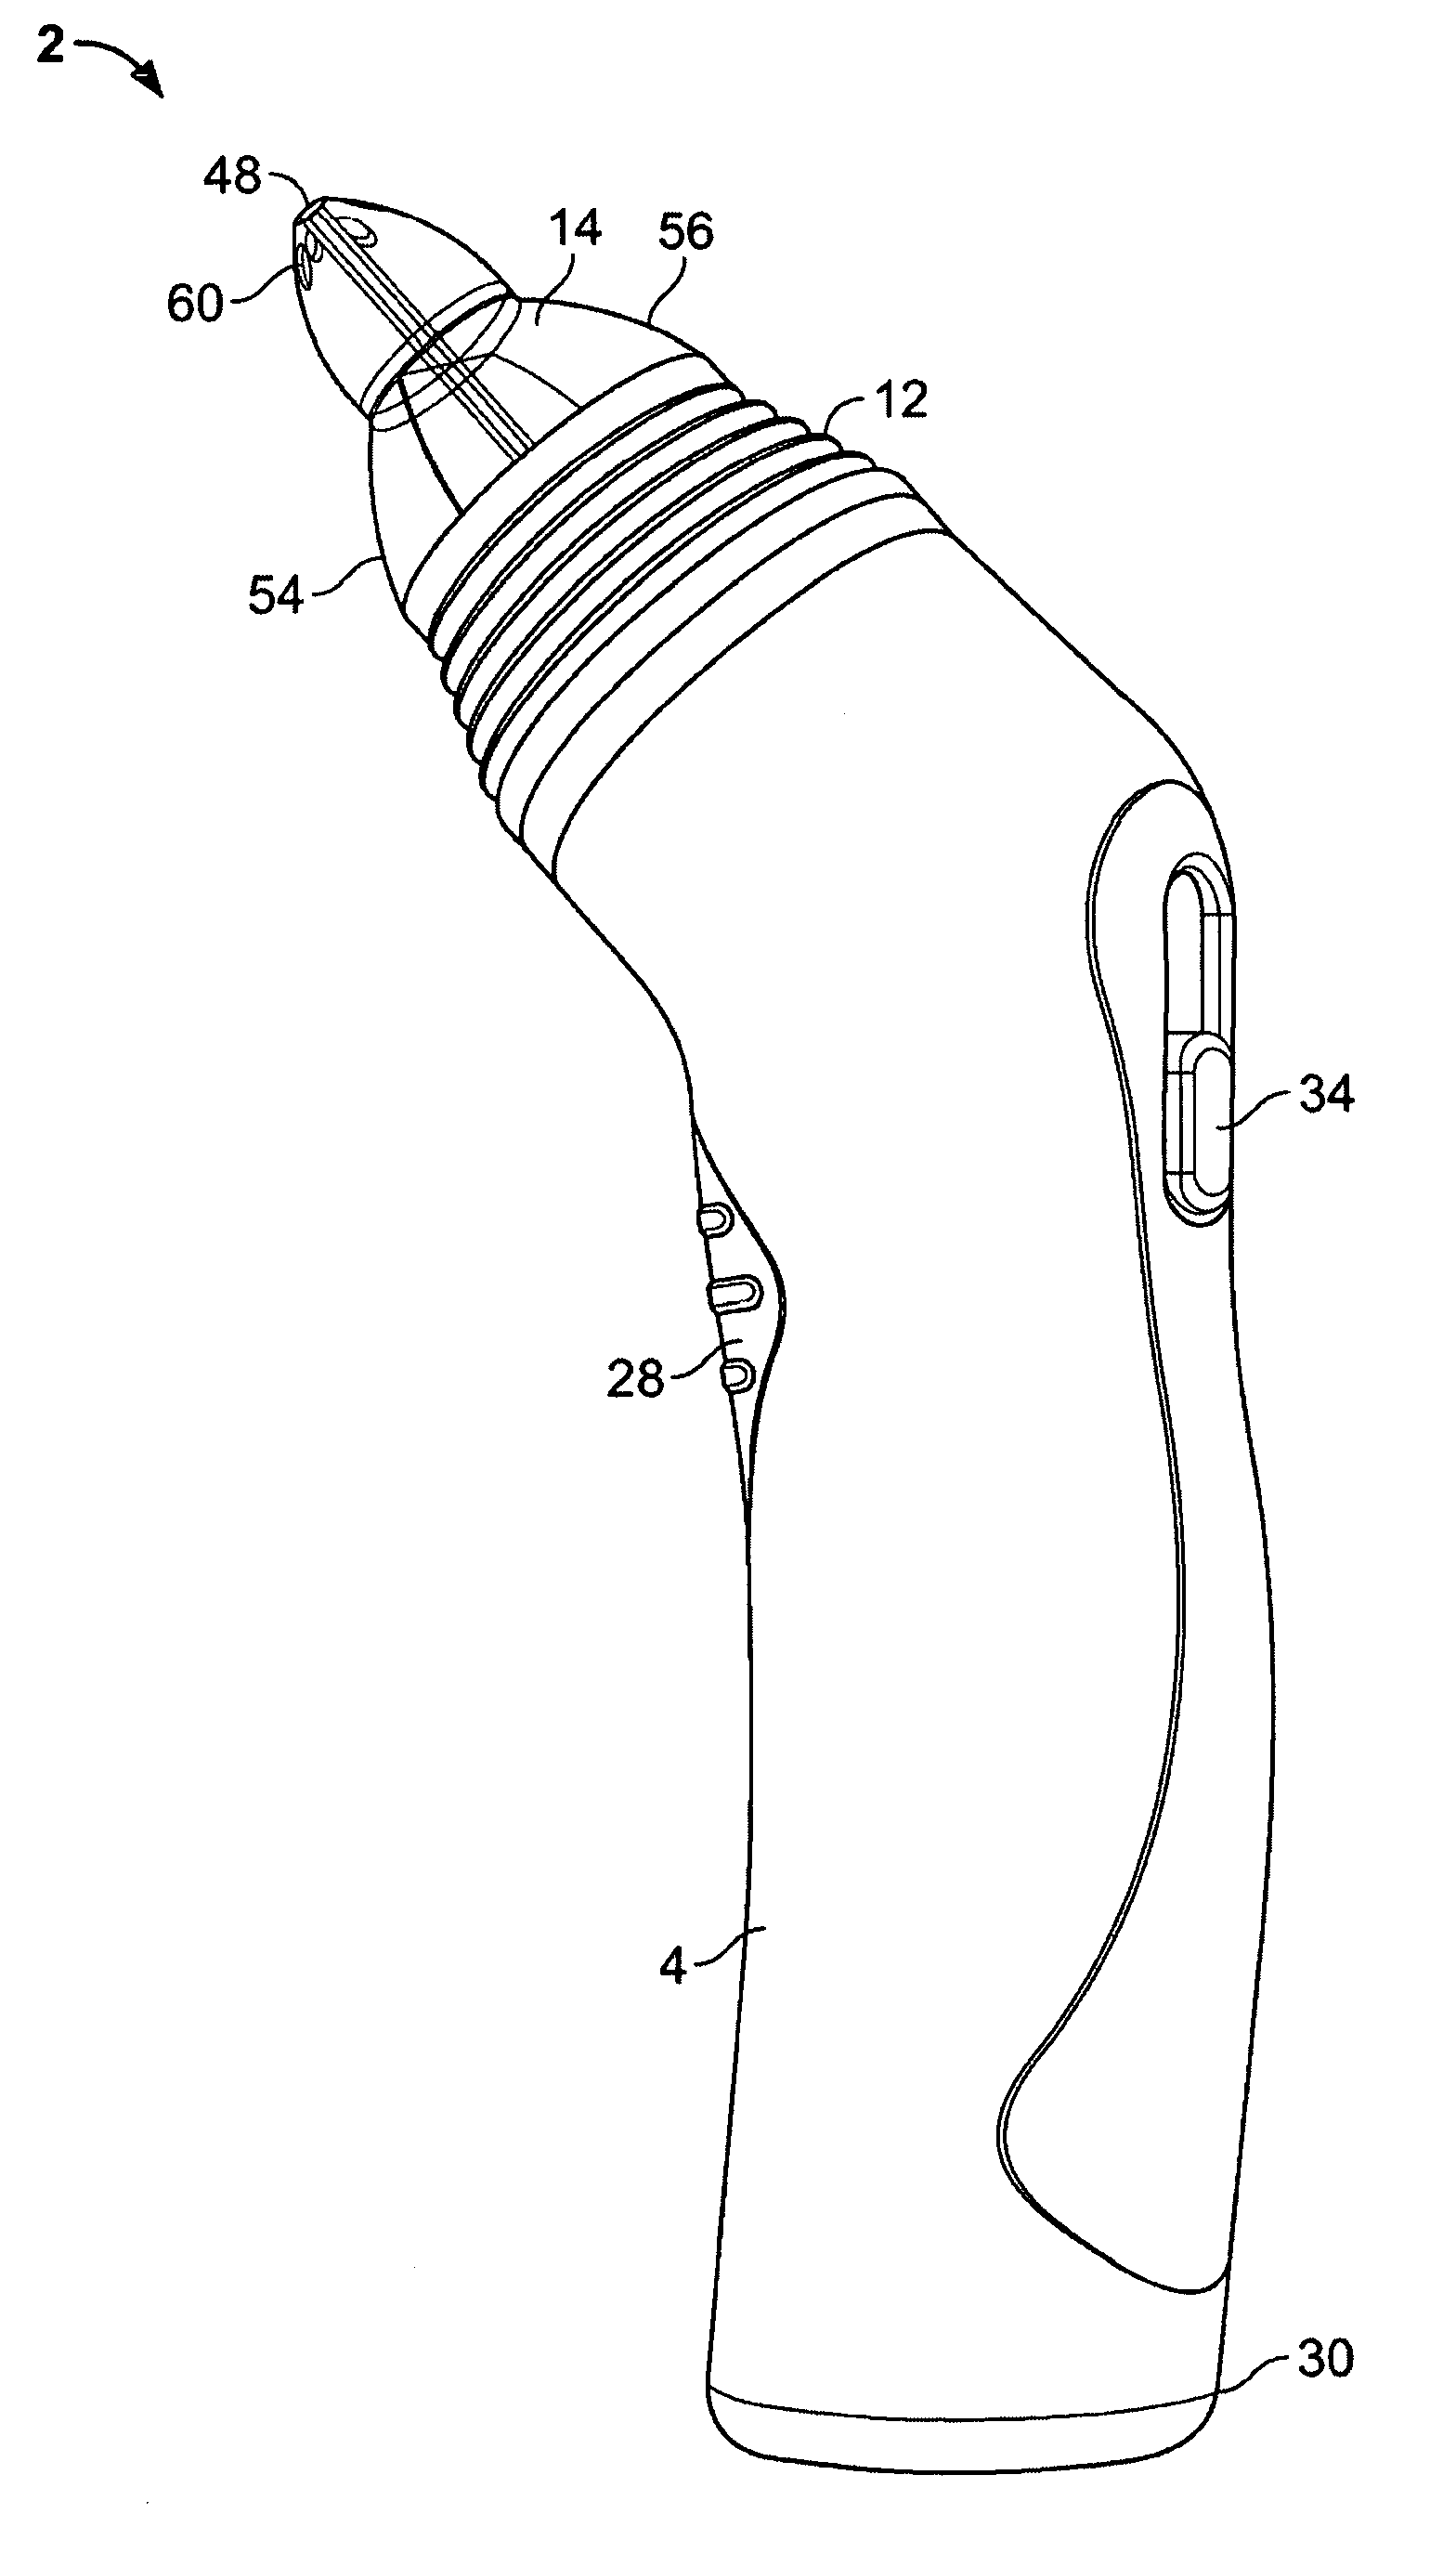 Irrigation and aspiration device and method